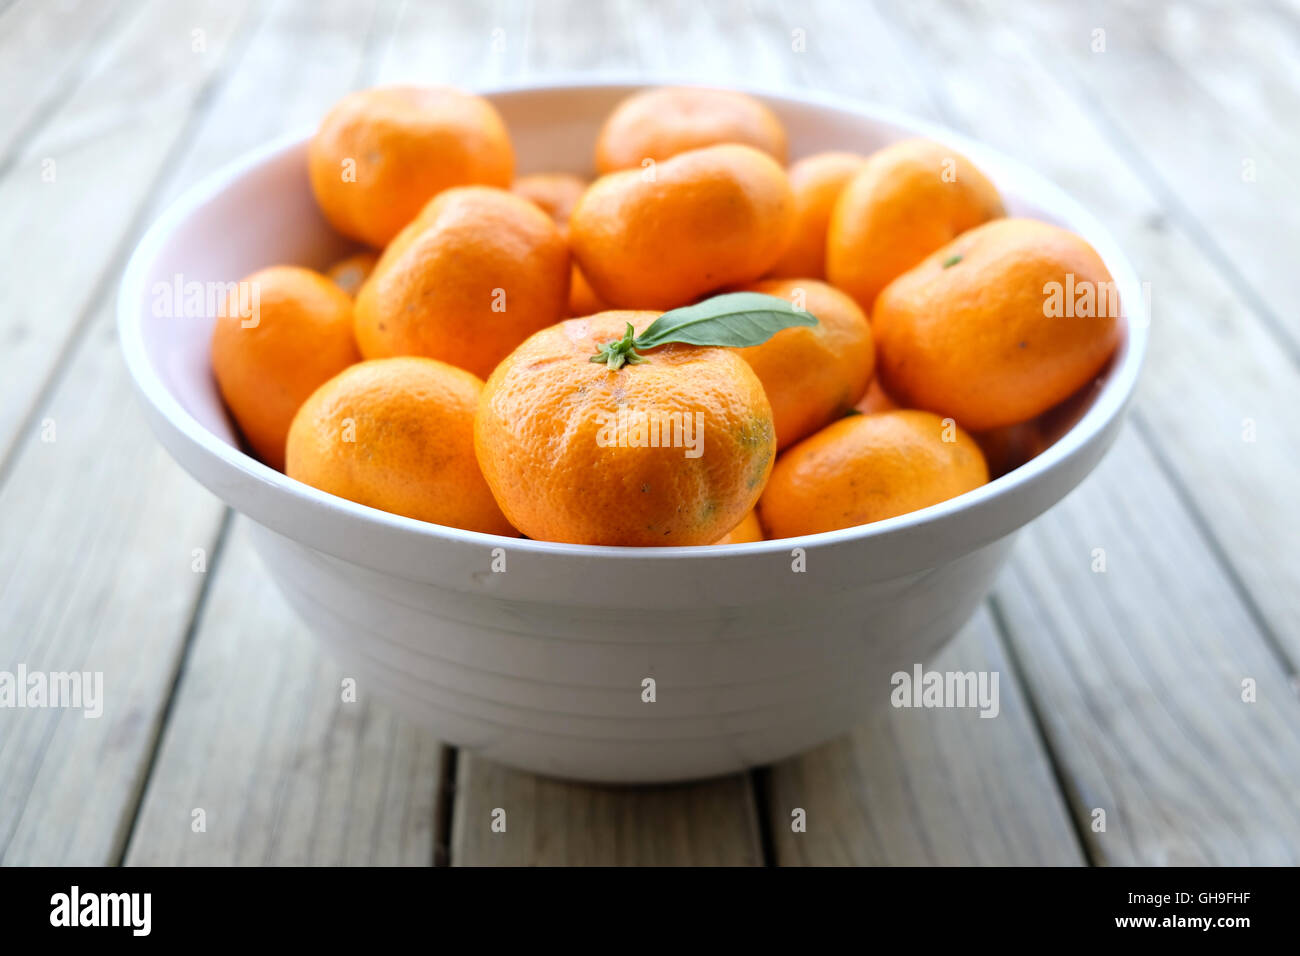 Imperfect satsuma mandarins - organic fruit produce - in a white bowl on a wooden background. Stock Photo